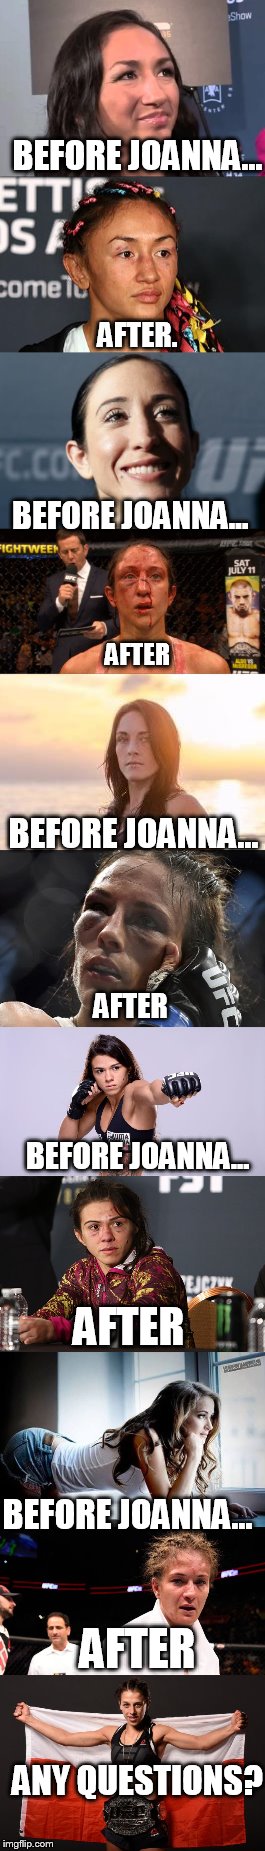 BEFORE JOANNA... AFTER. BEFORE JOANNA... AFTER; BEFORE JOANNA... AFTER; BEFORE JOANNA... AFTER; BEFORE JOANNA... AFTER; ANY QUESTIONS? | image tagged in mma,joanna jedrzejczyk,ufc | made w/ Imgflip meme maker